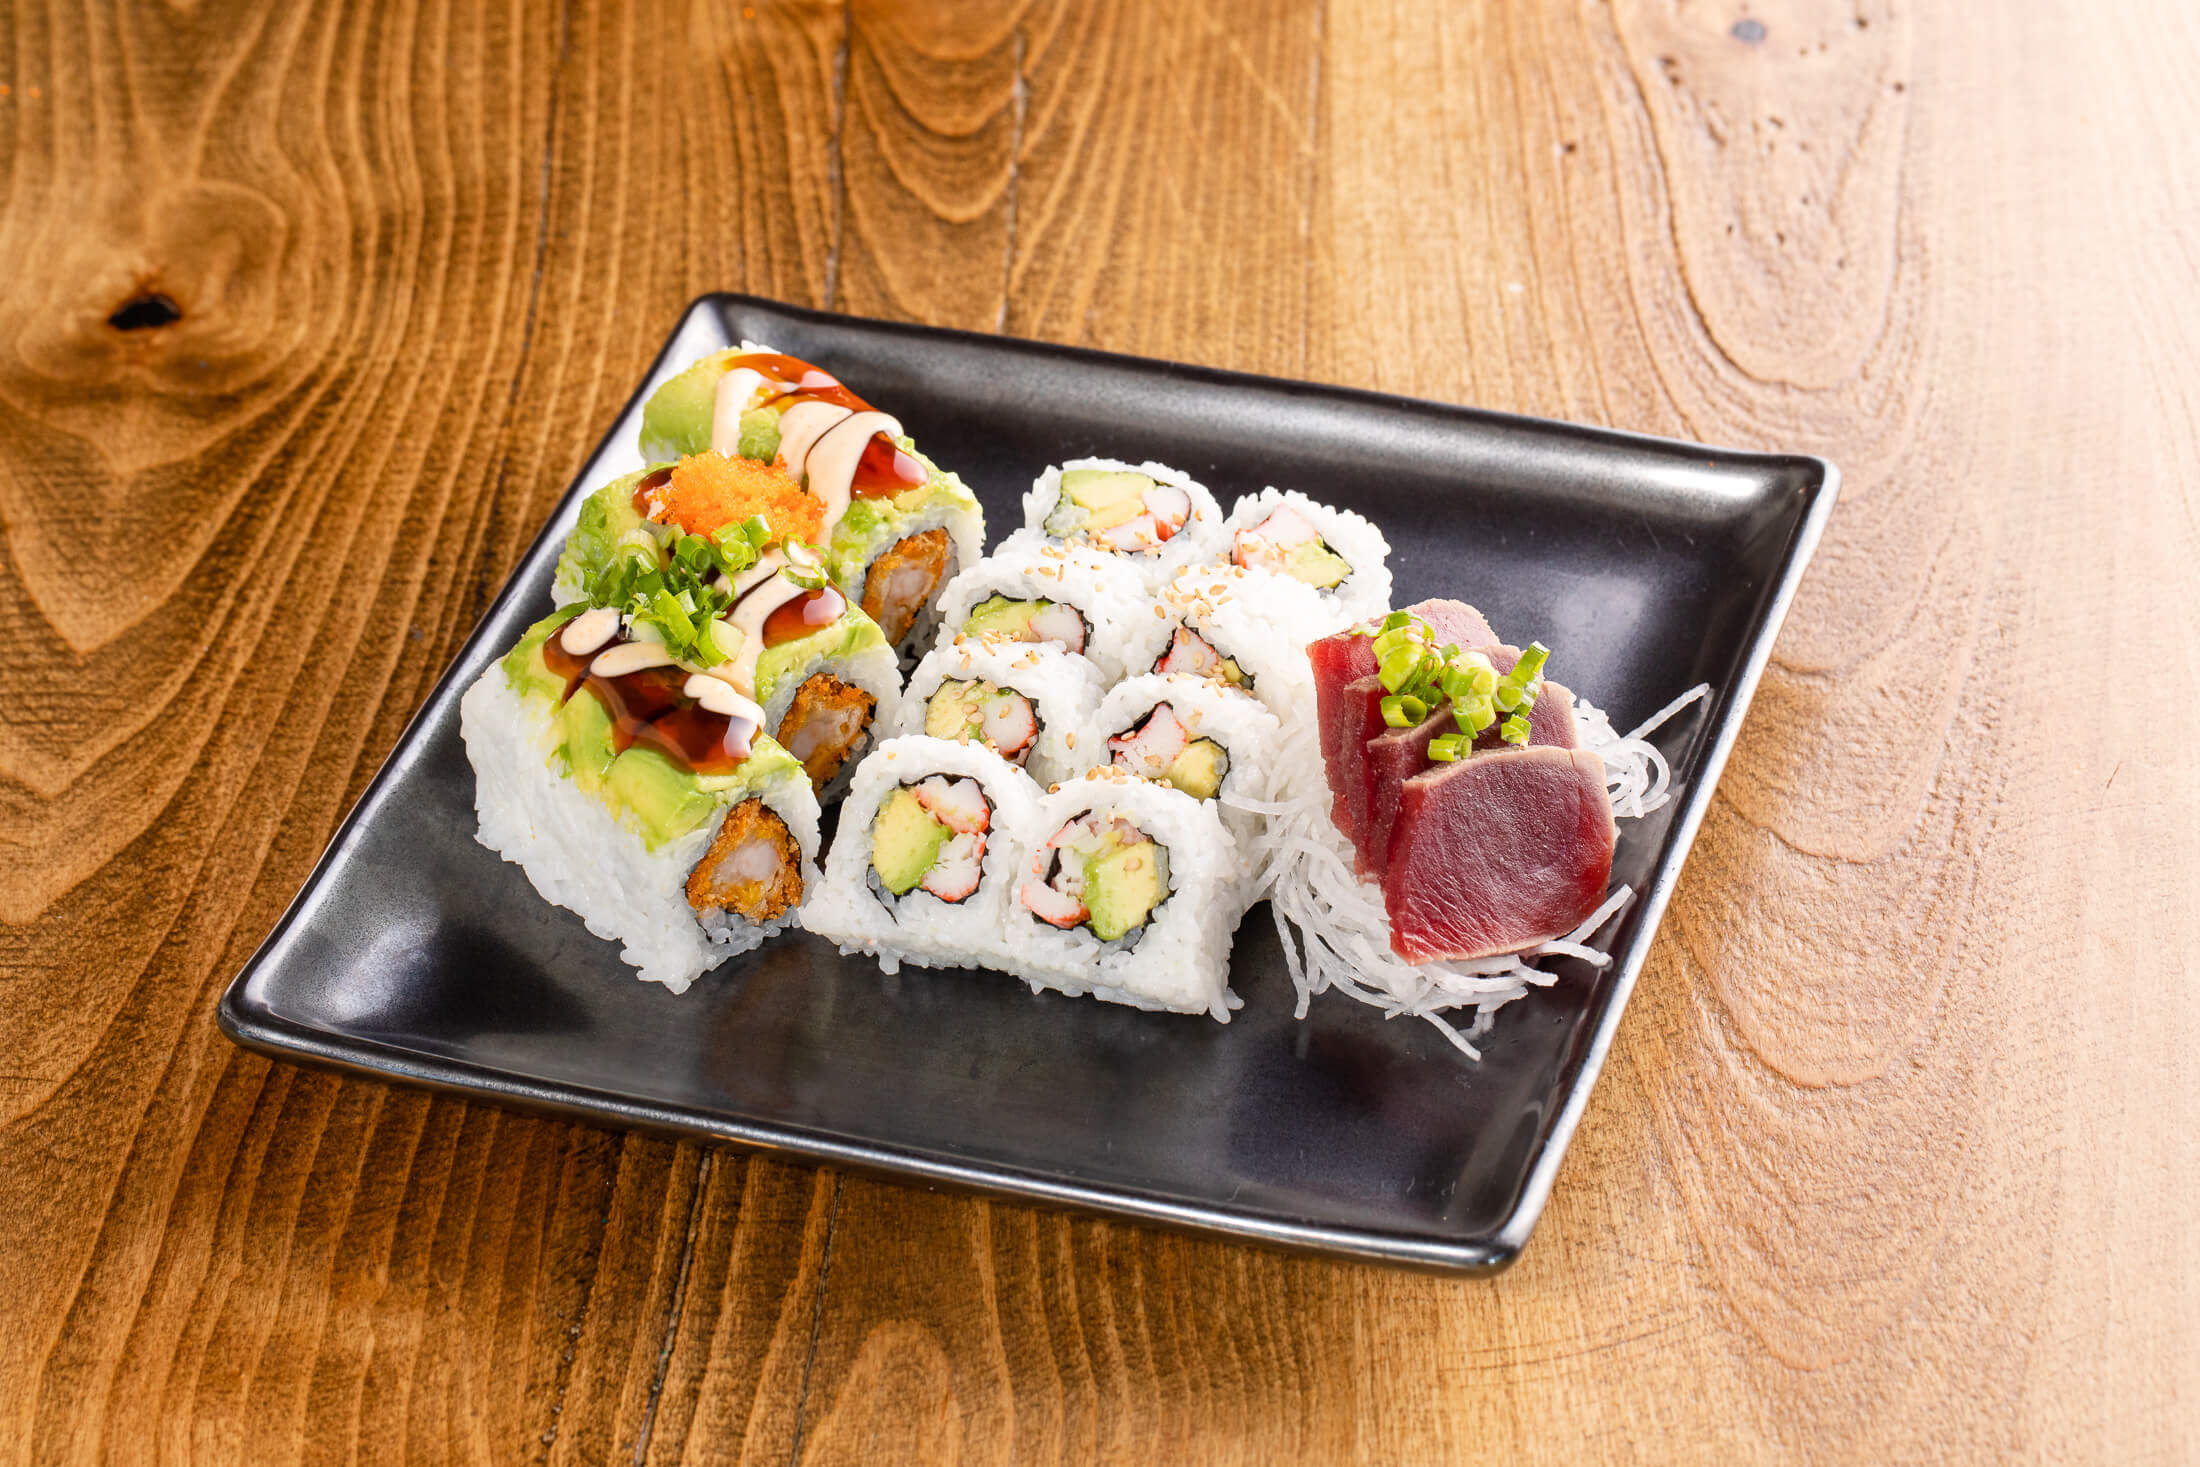 California roll and our best selling Fair Oaks roll & Sea Steak